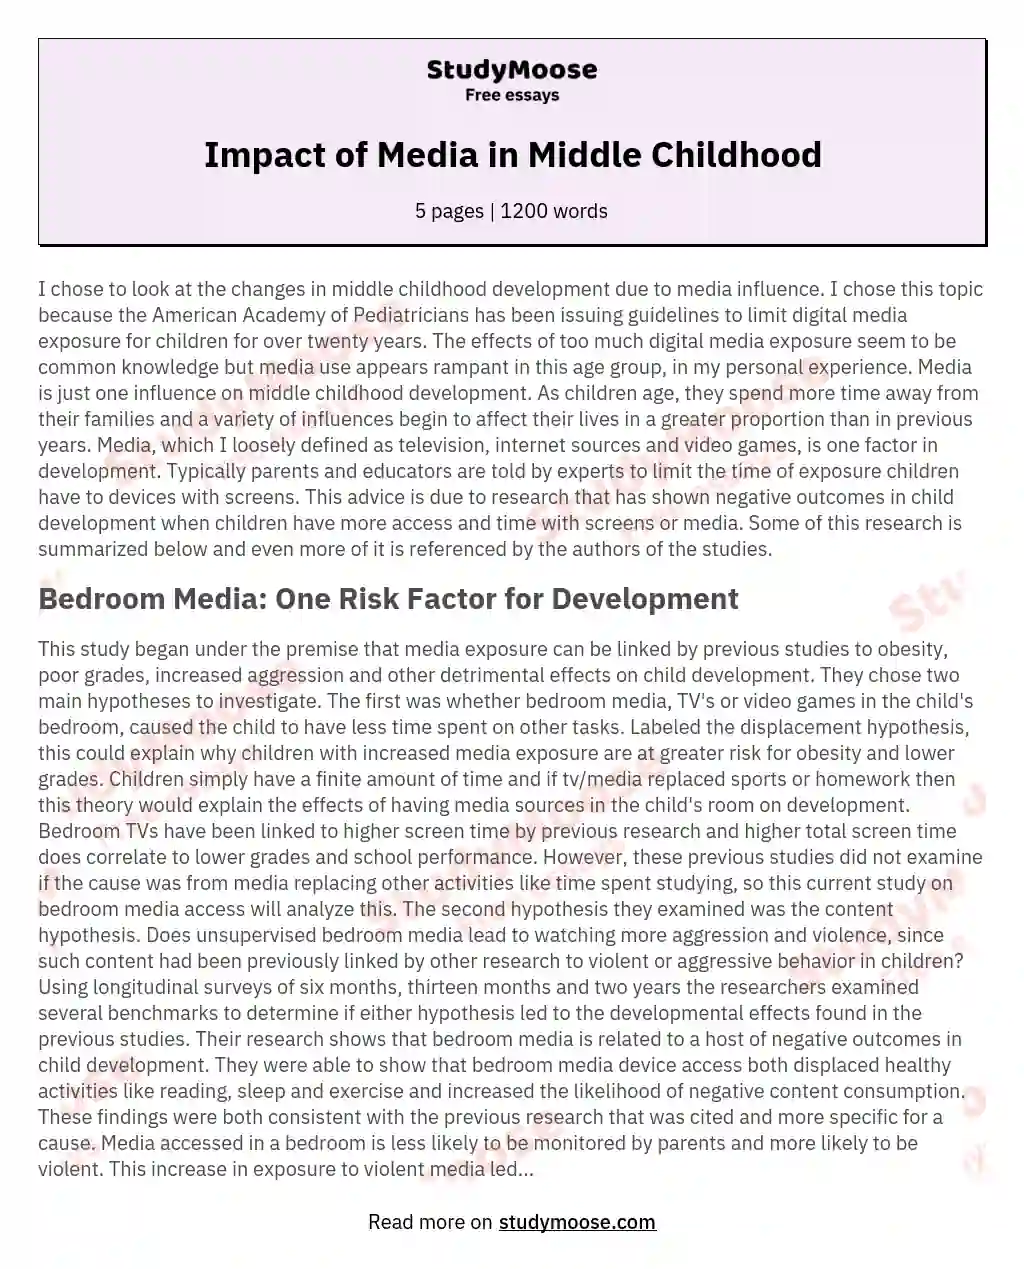 Impact of Media in Middle Childhood essay